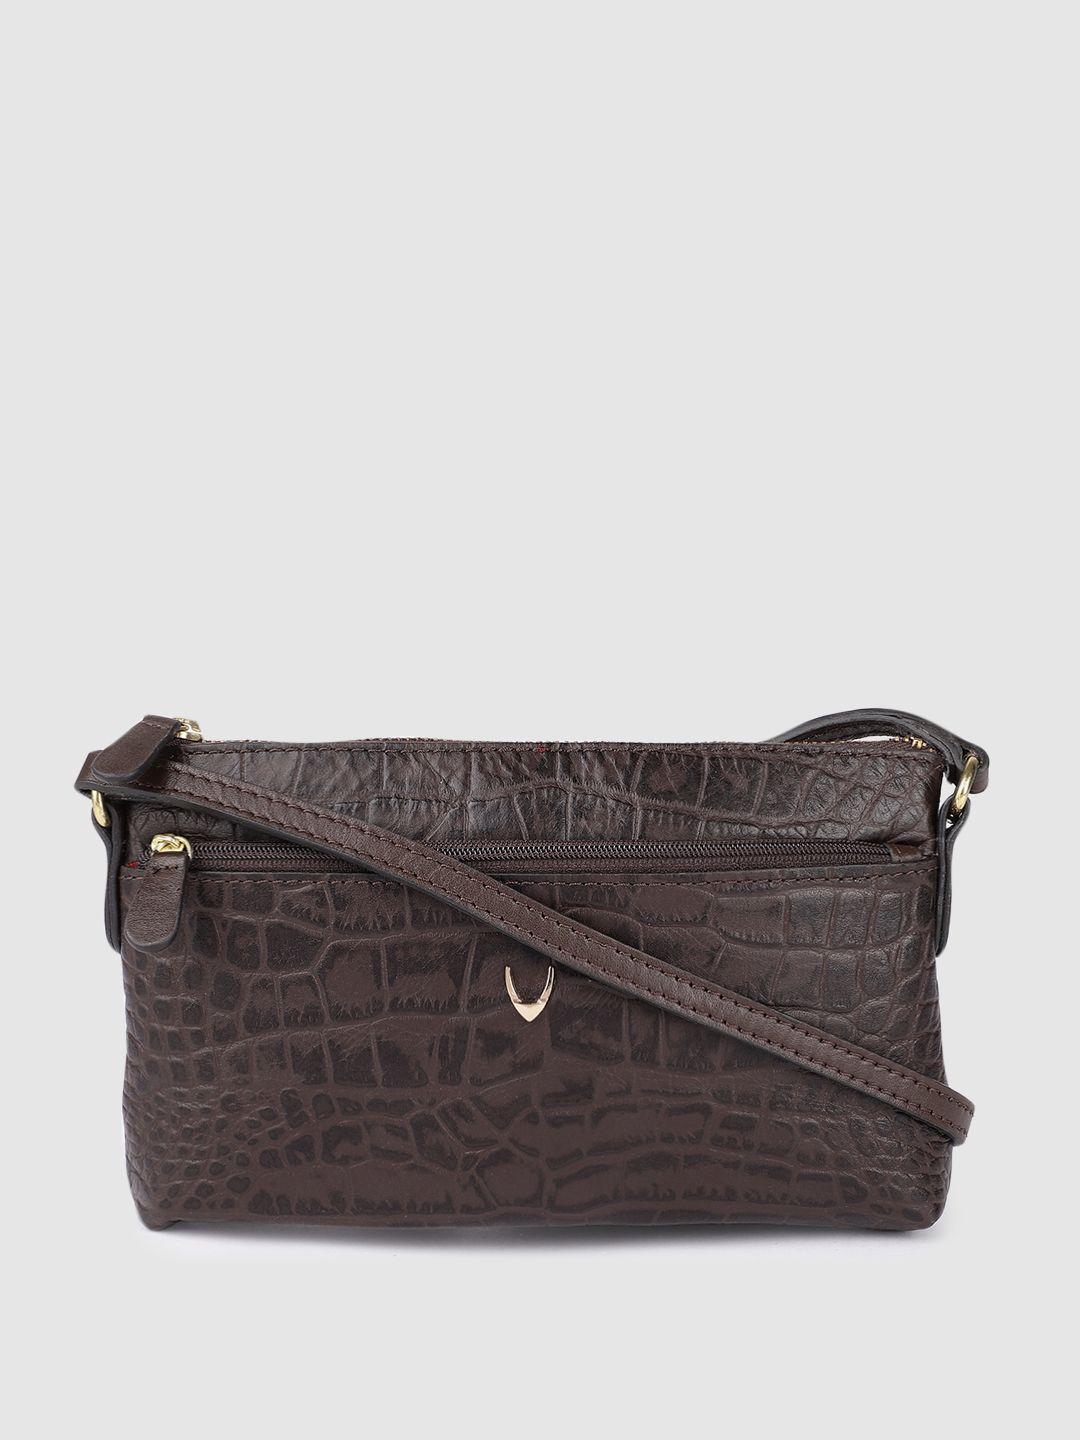 hidesign brown textured leather structured sling bag